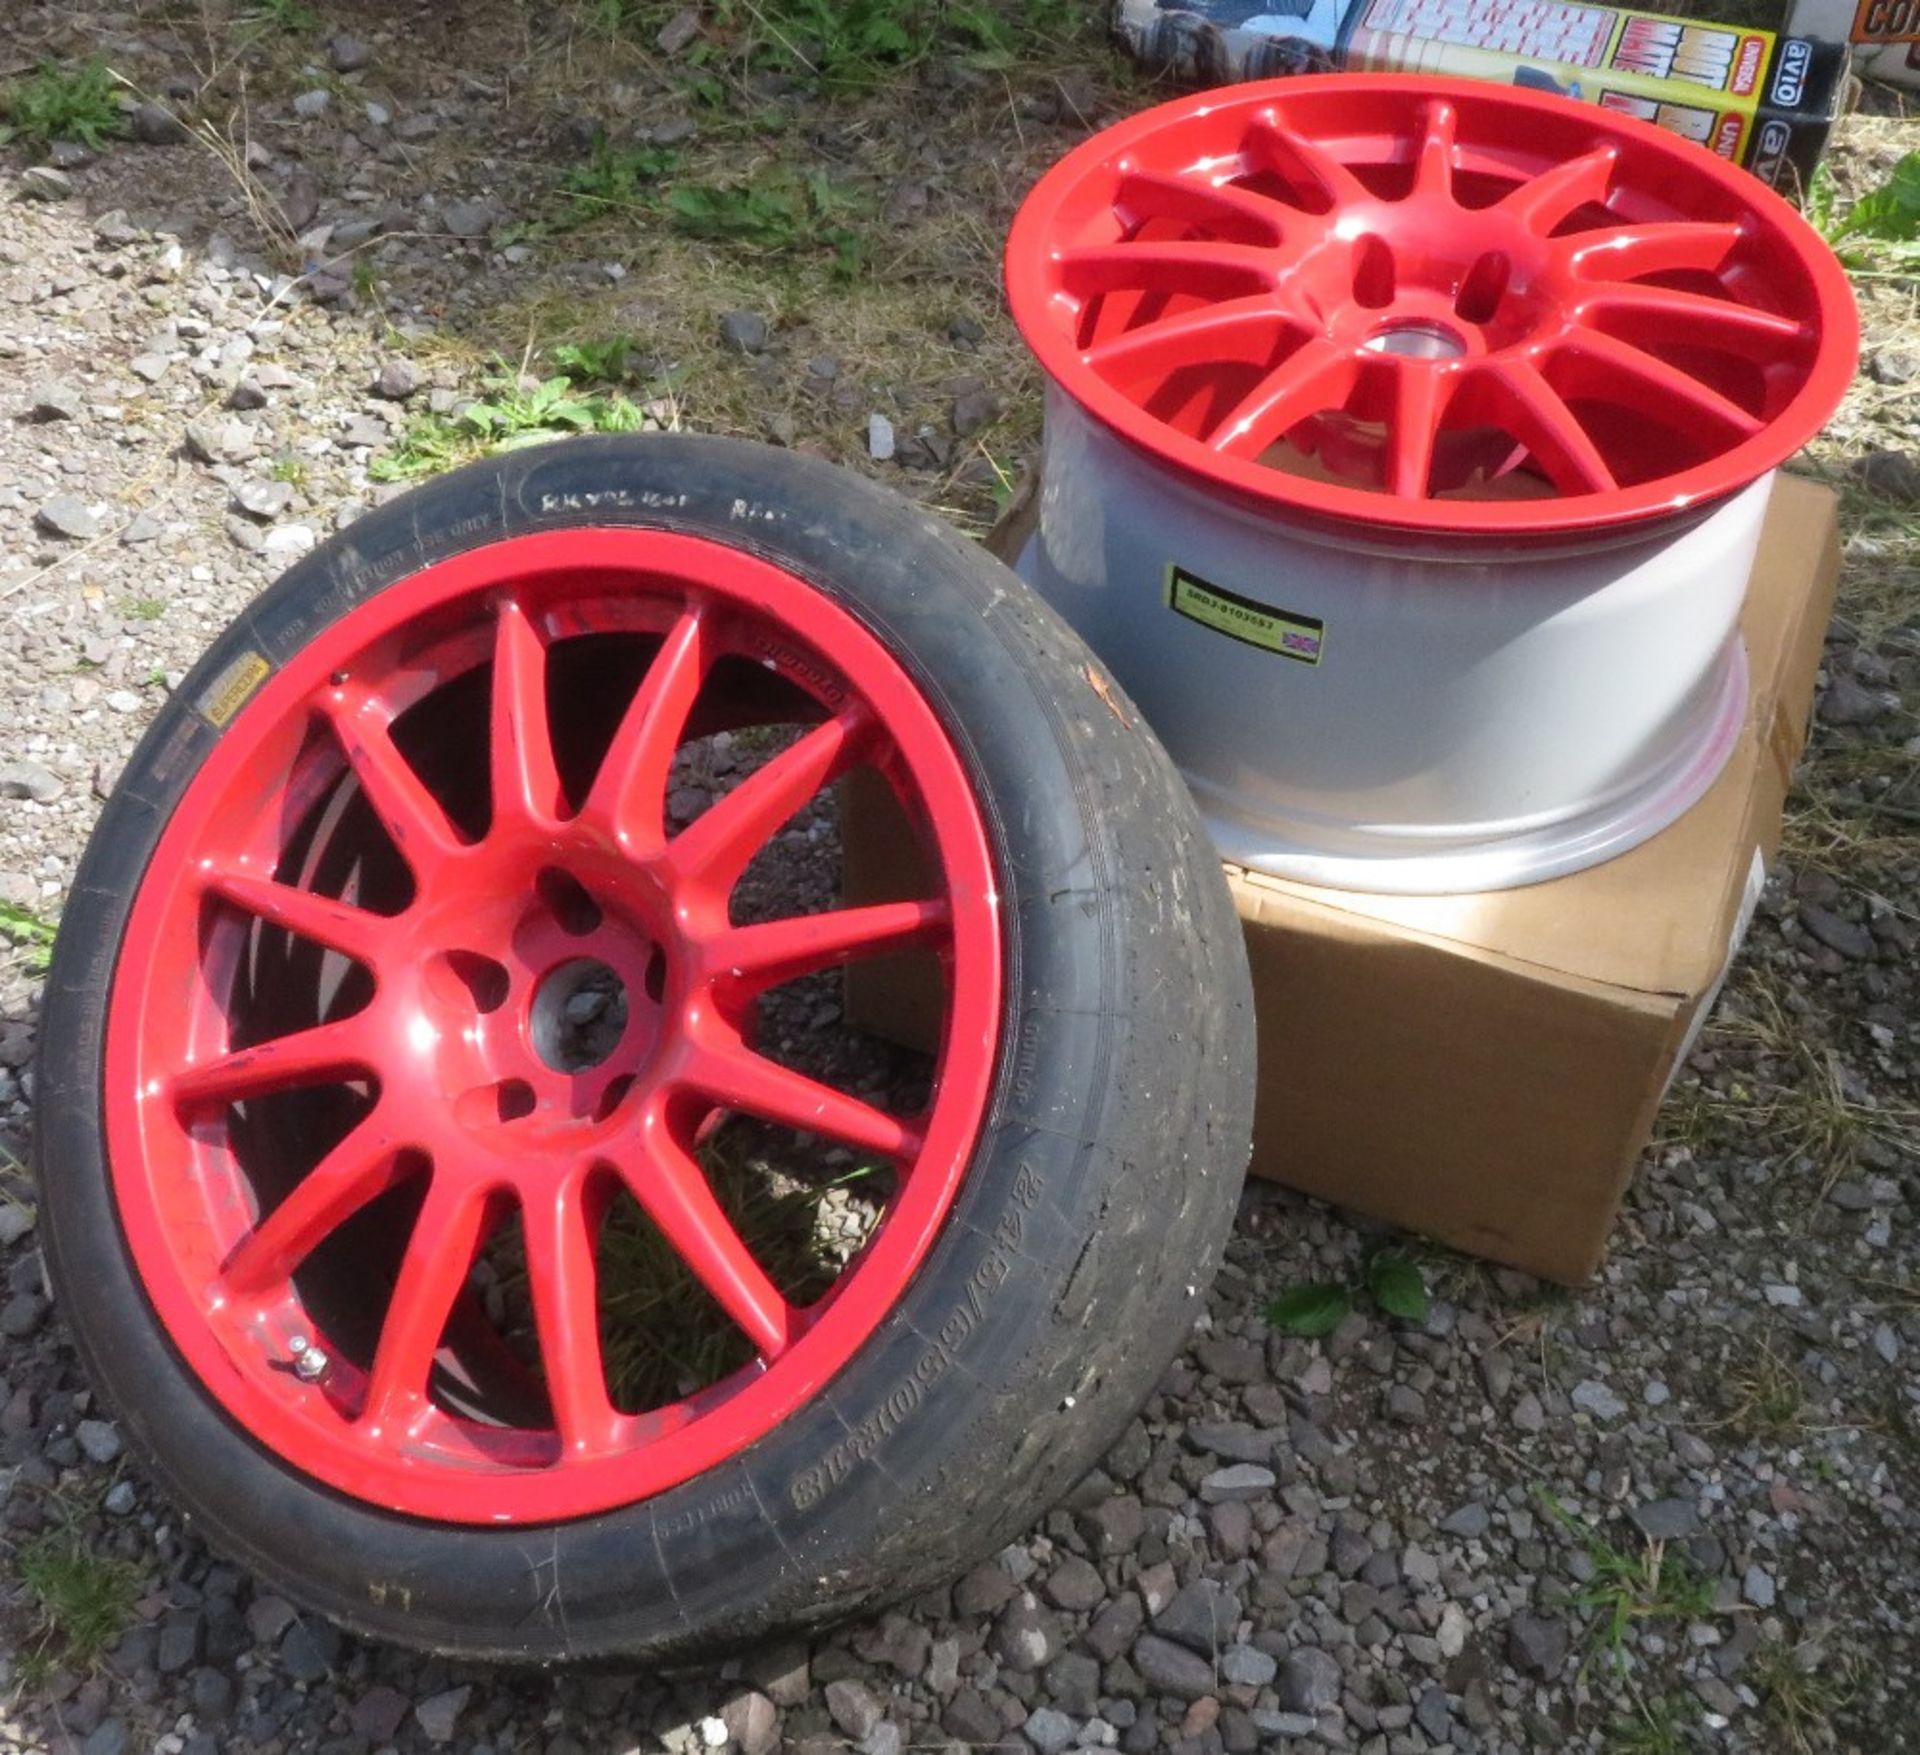 Set of 4 red alloy racing wheels labelled Team Dynamics Pro Race 1.3, 2 with worn tyres in place